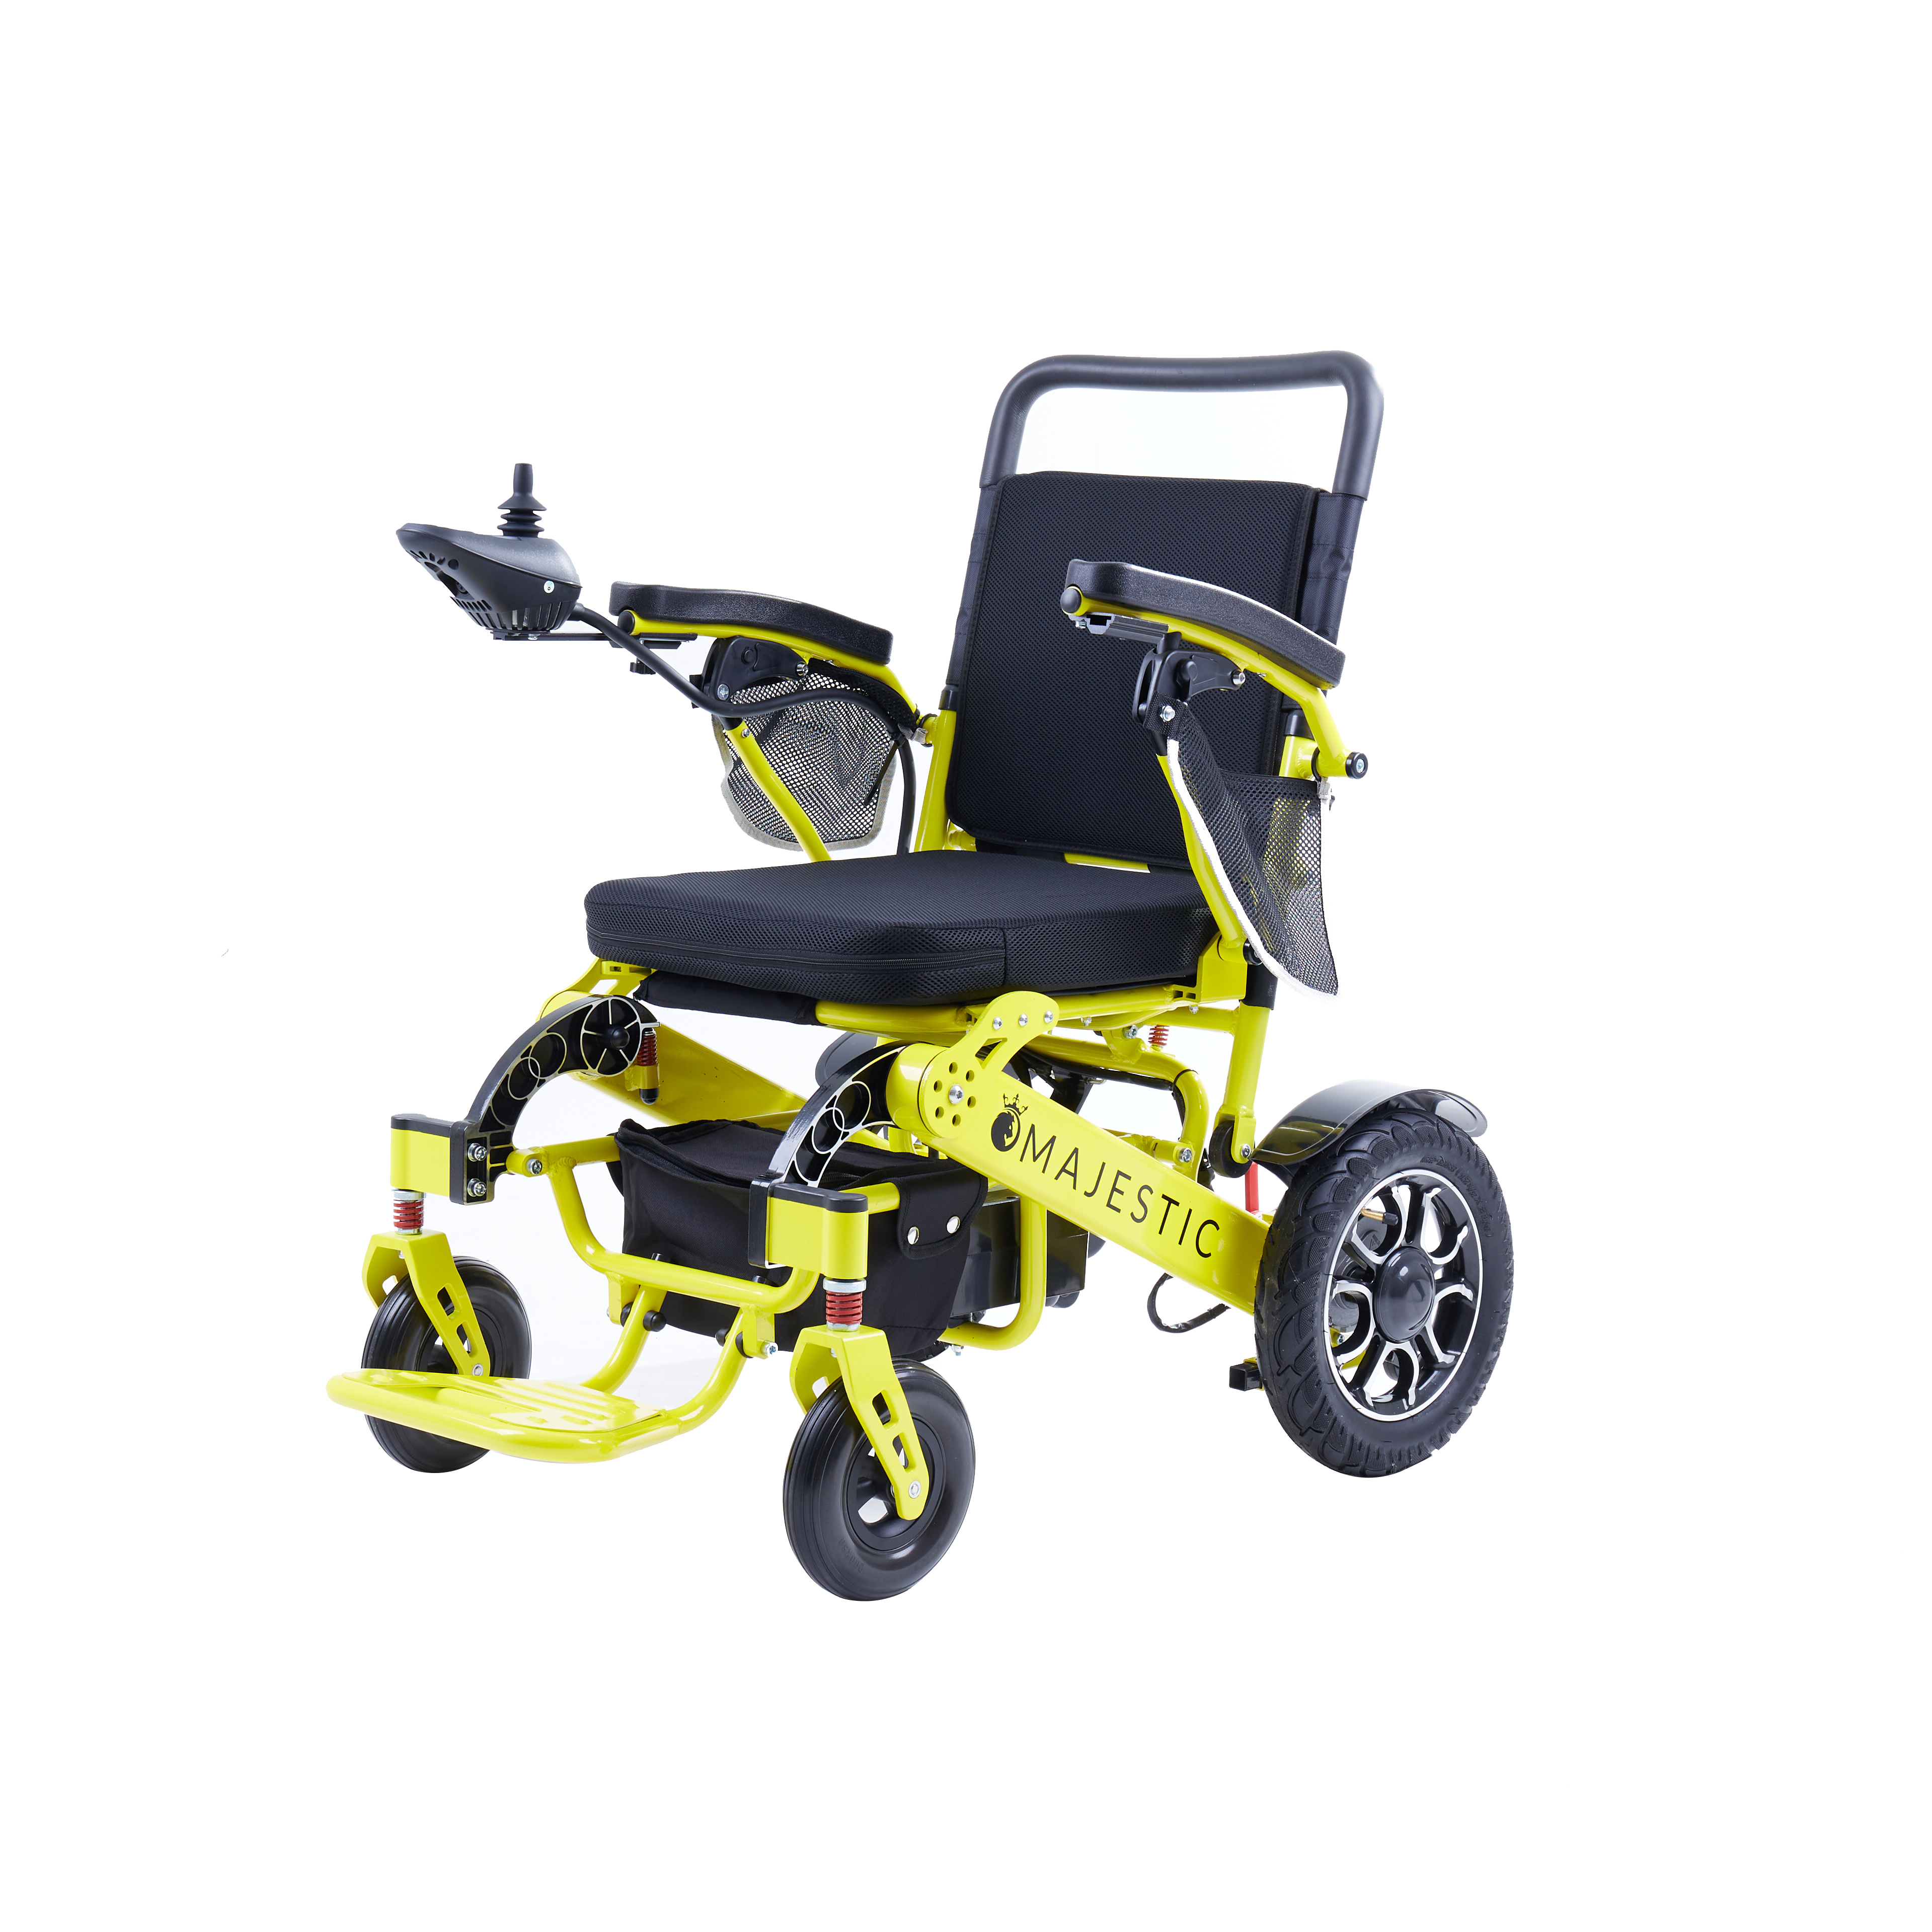 Elder and Disabled Lightweight Mobility Aid Motorized Folding Electric Power Wheelchair Featured Image